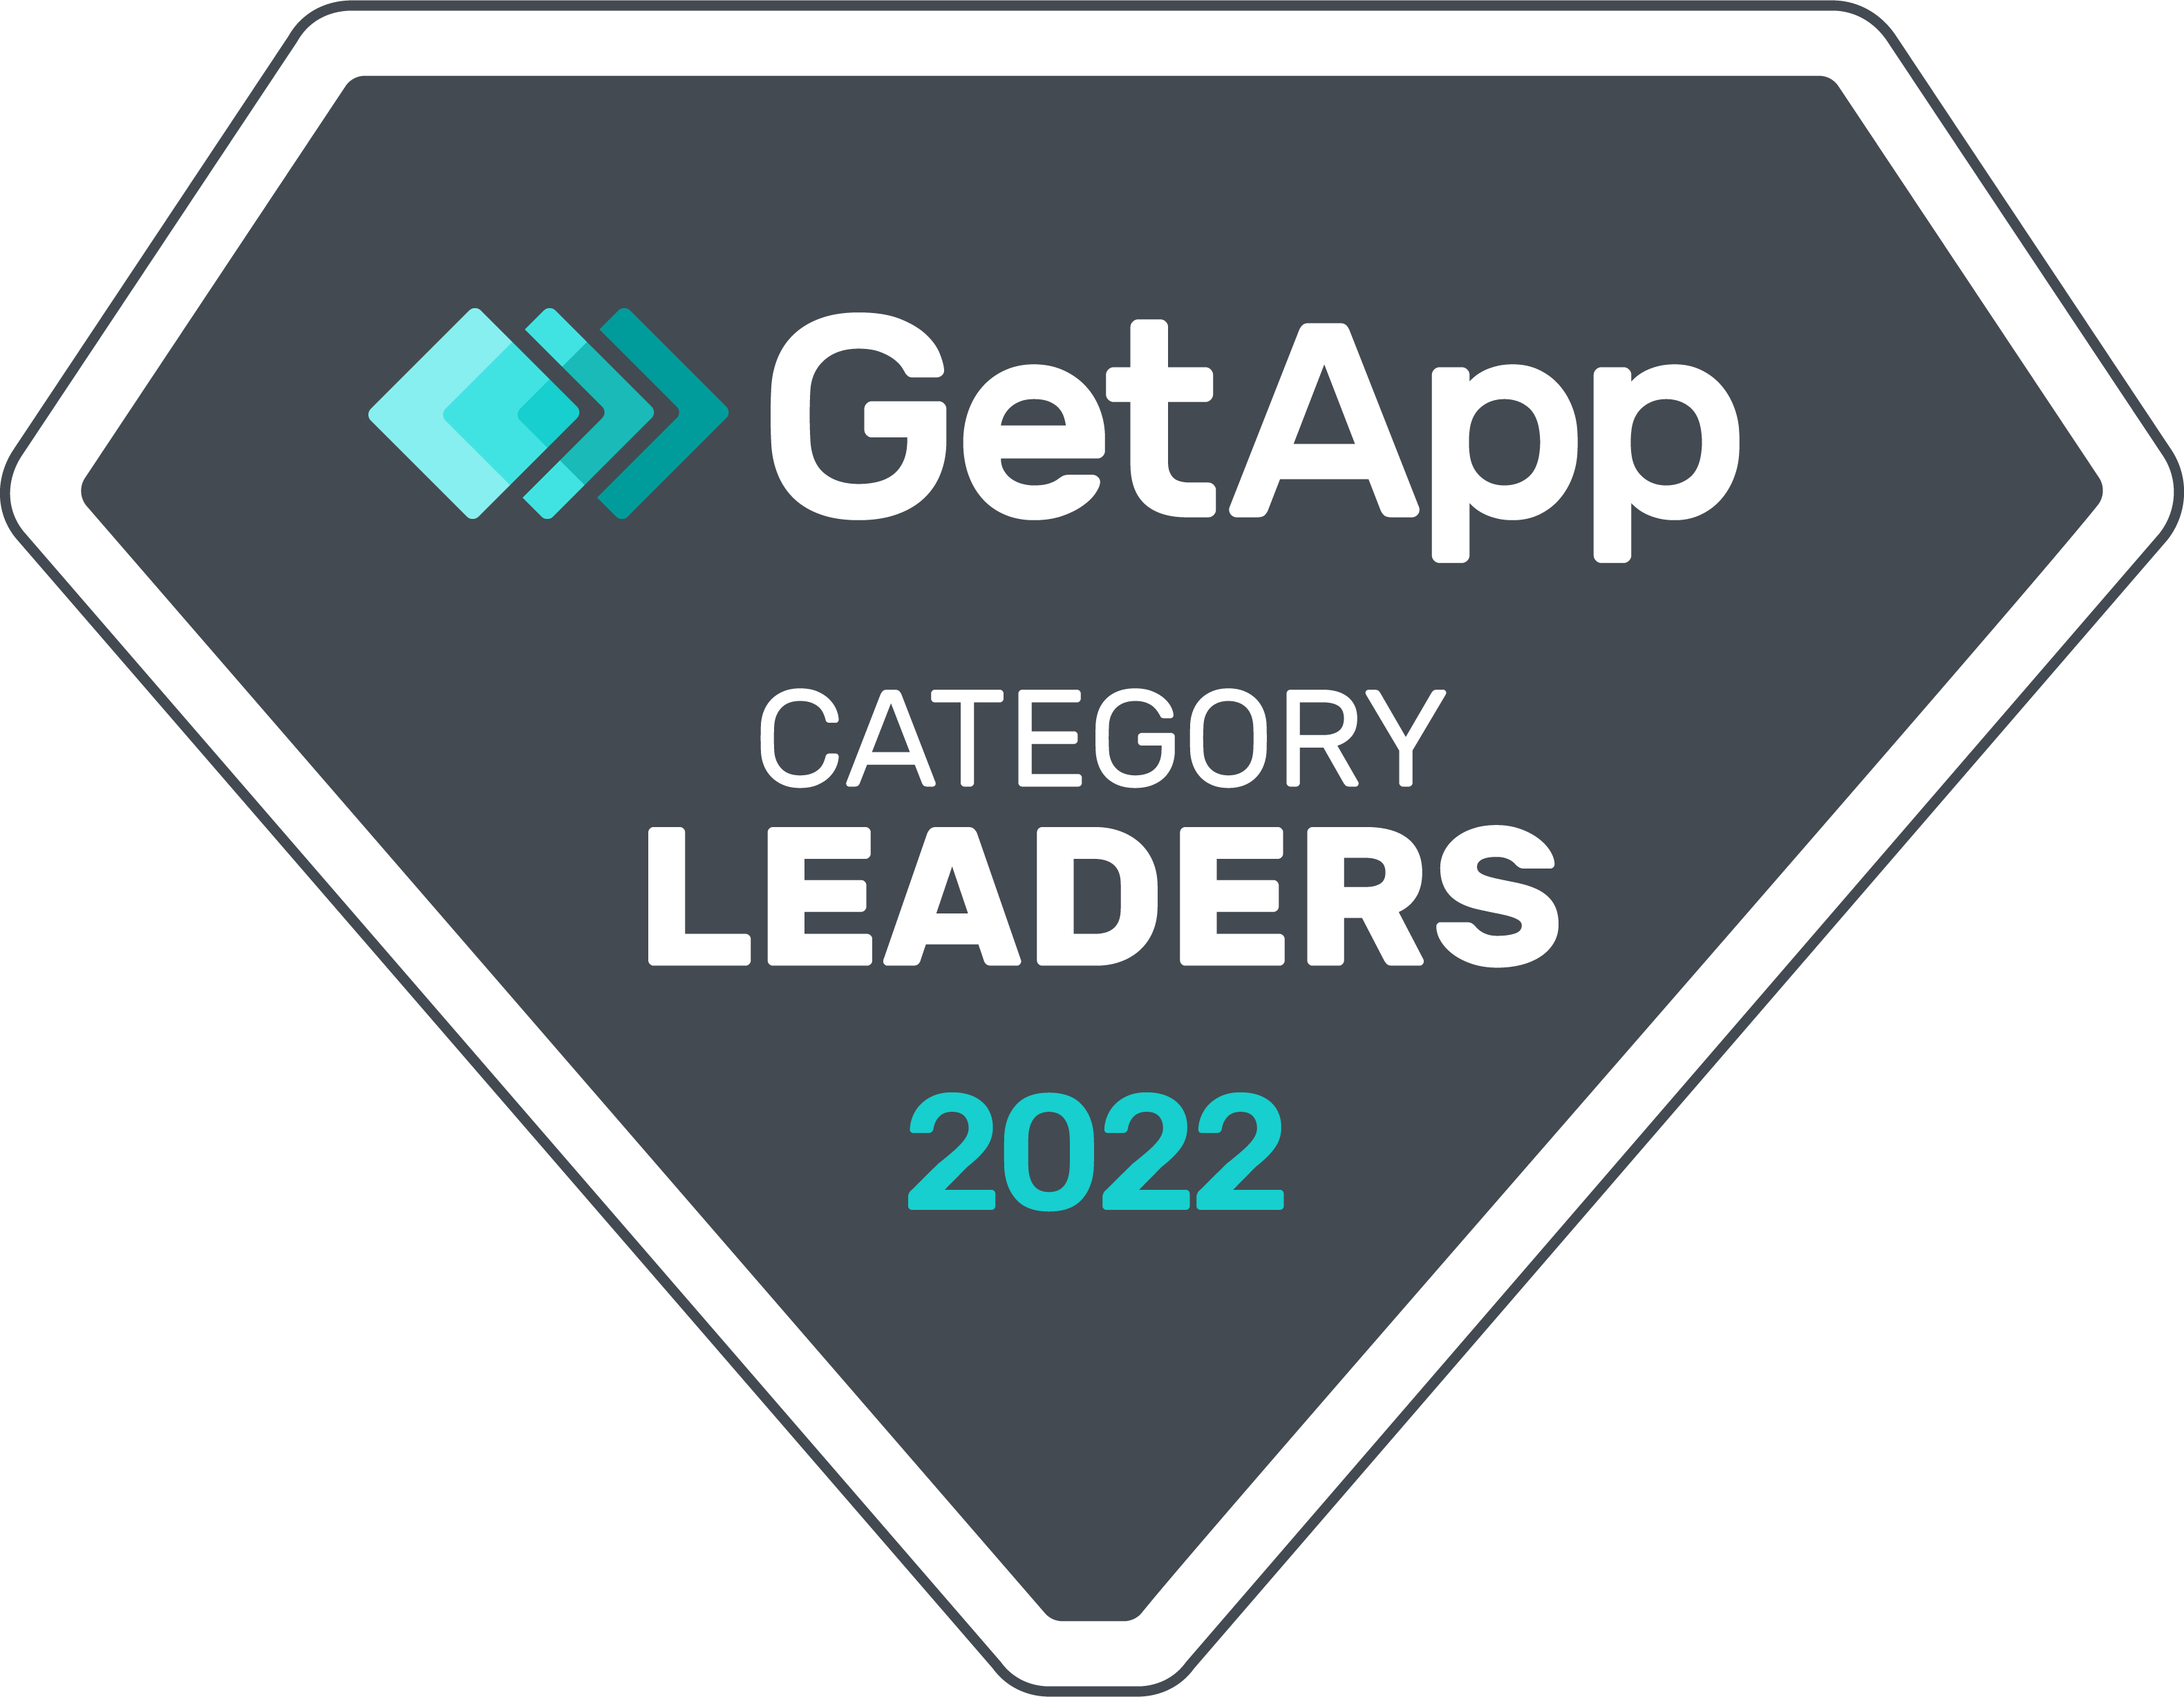 Category leaders 2022